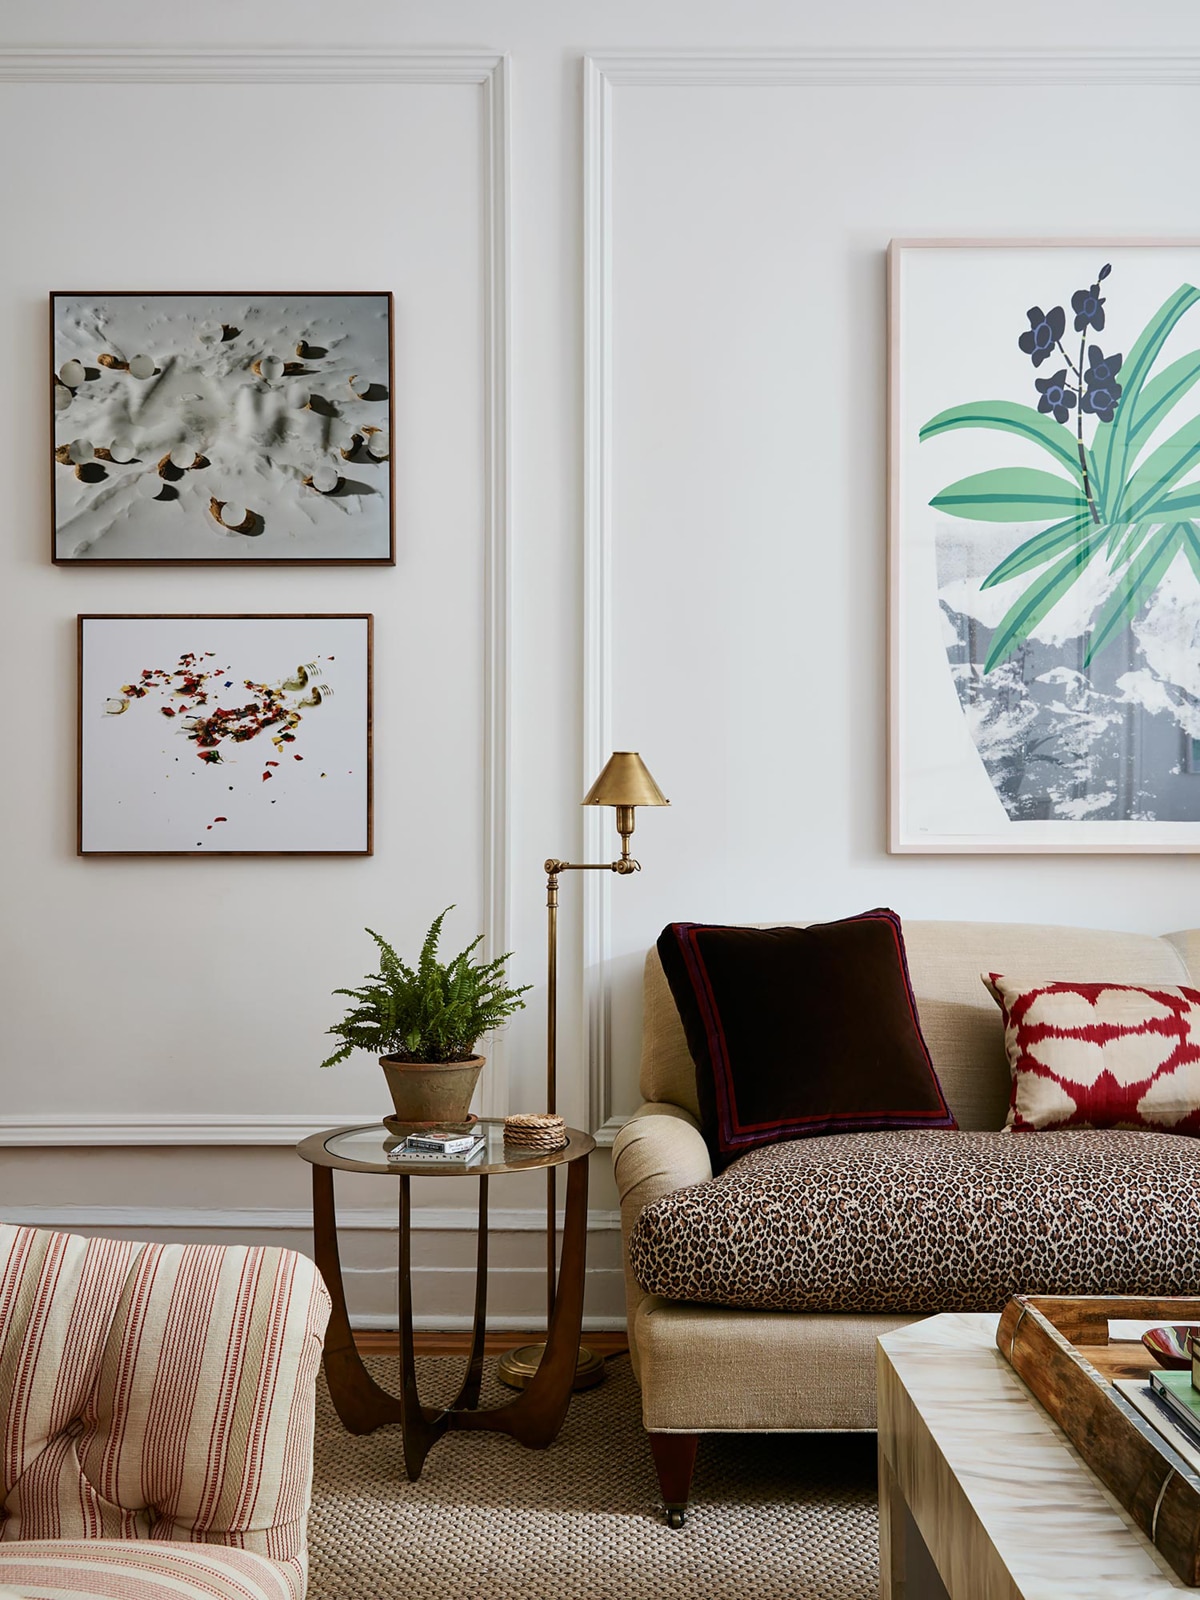 an eclectic mix of modern art and formal furnishings in this small apartment living room | room of the week via coco kelley